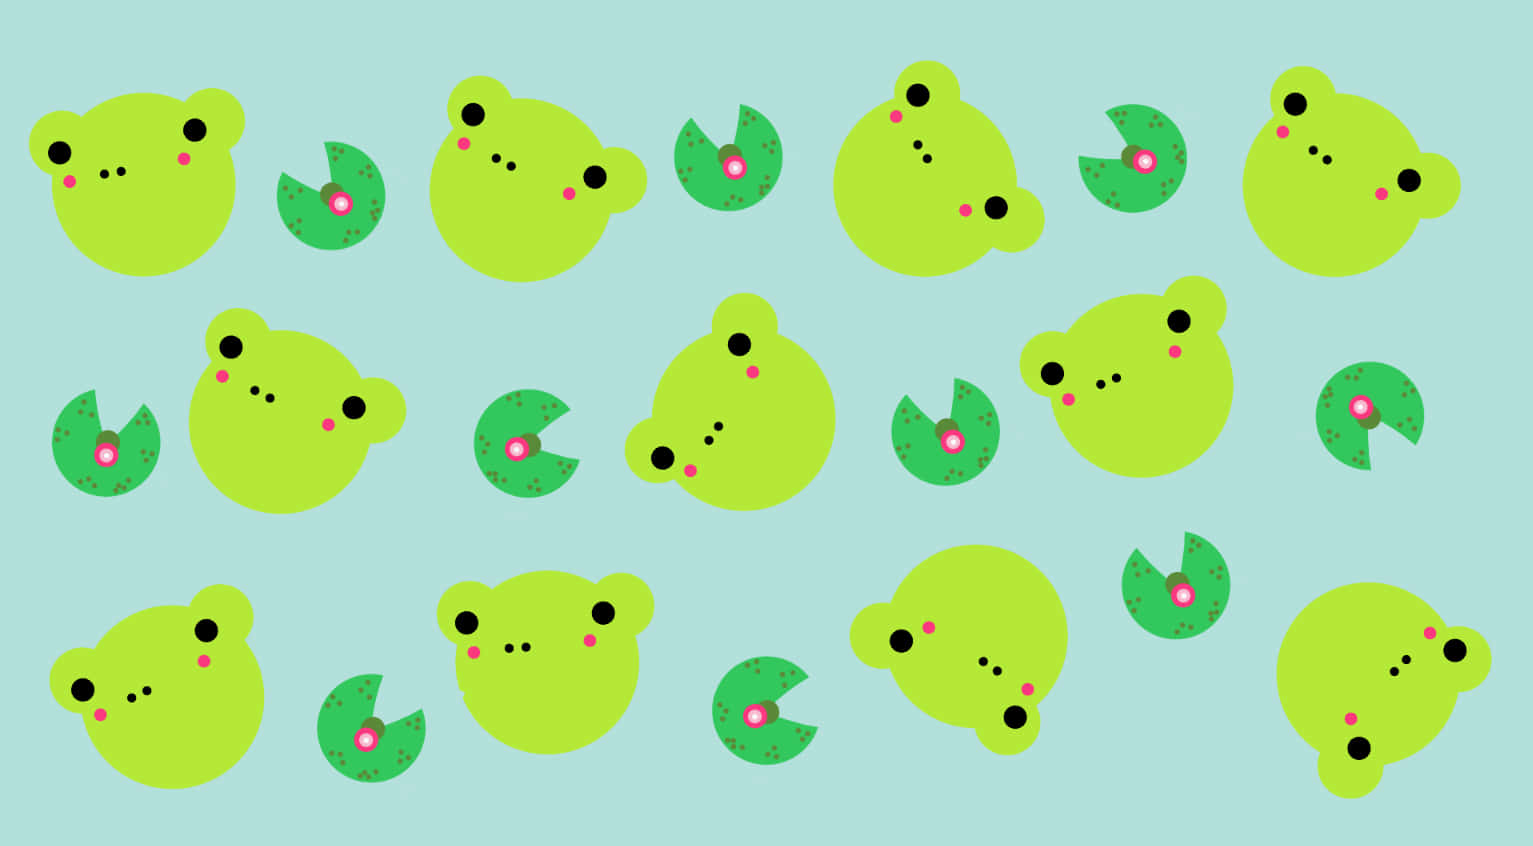 Feel the Kawaii vibes with this cute green character! Wallpaper